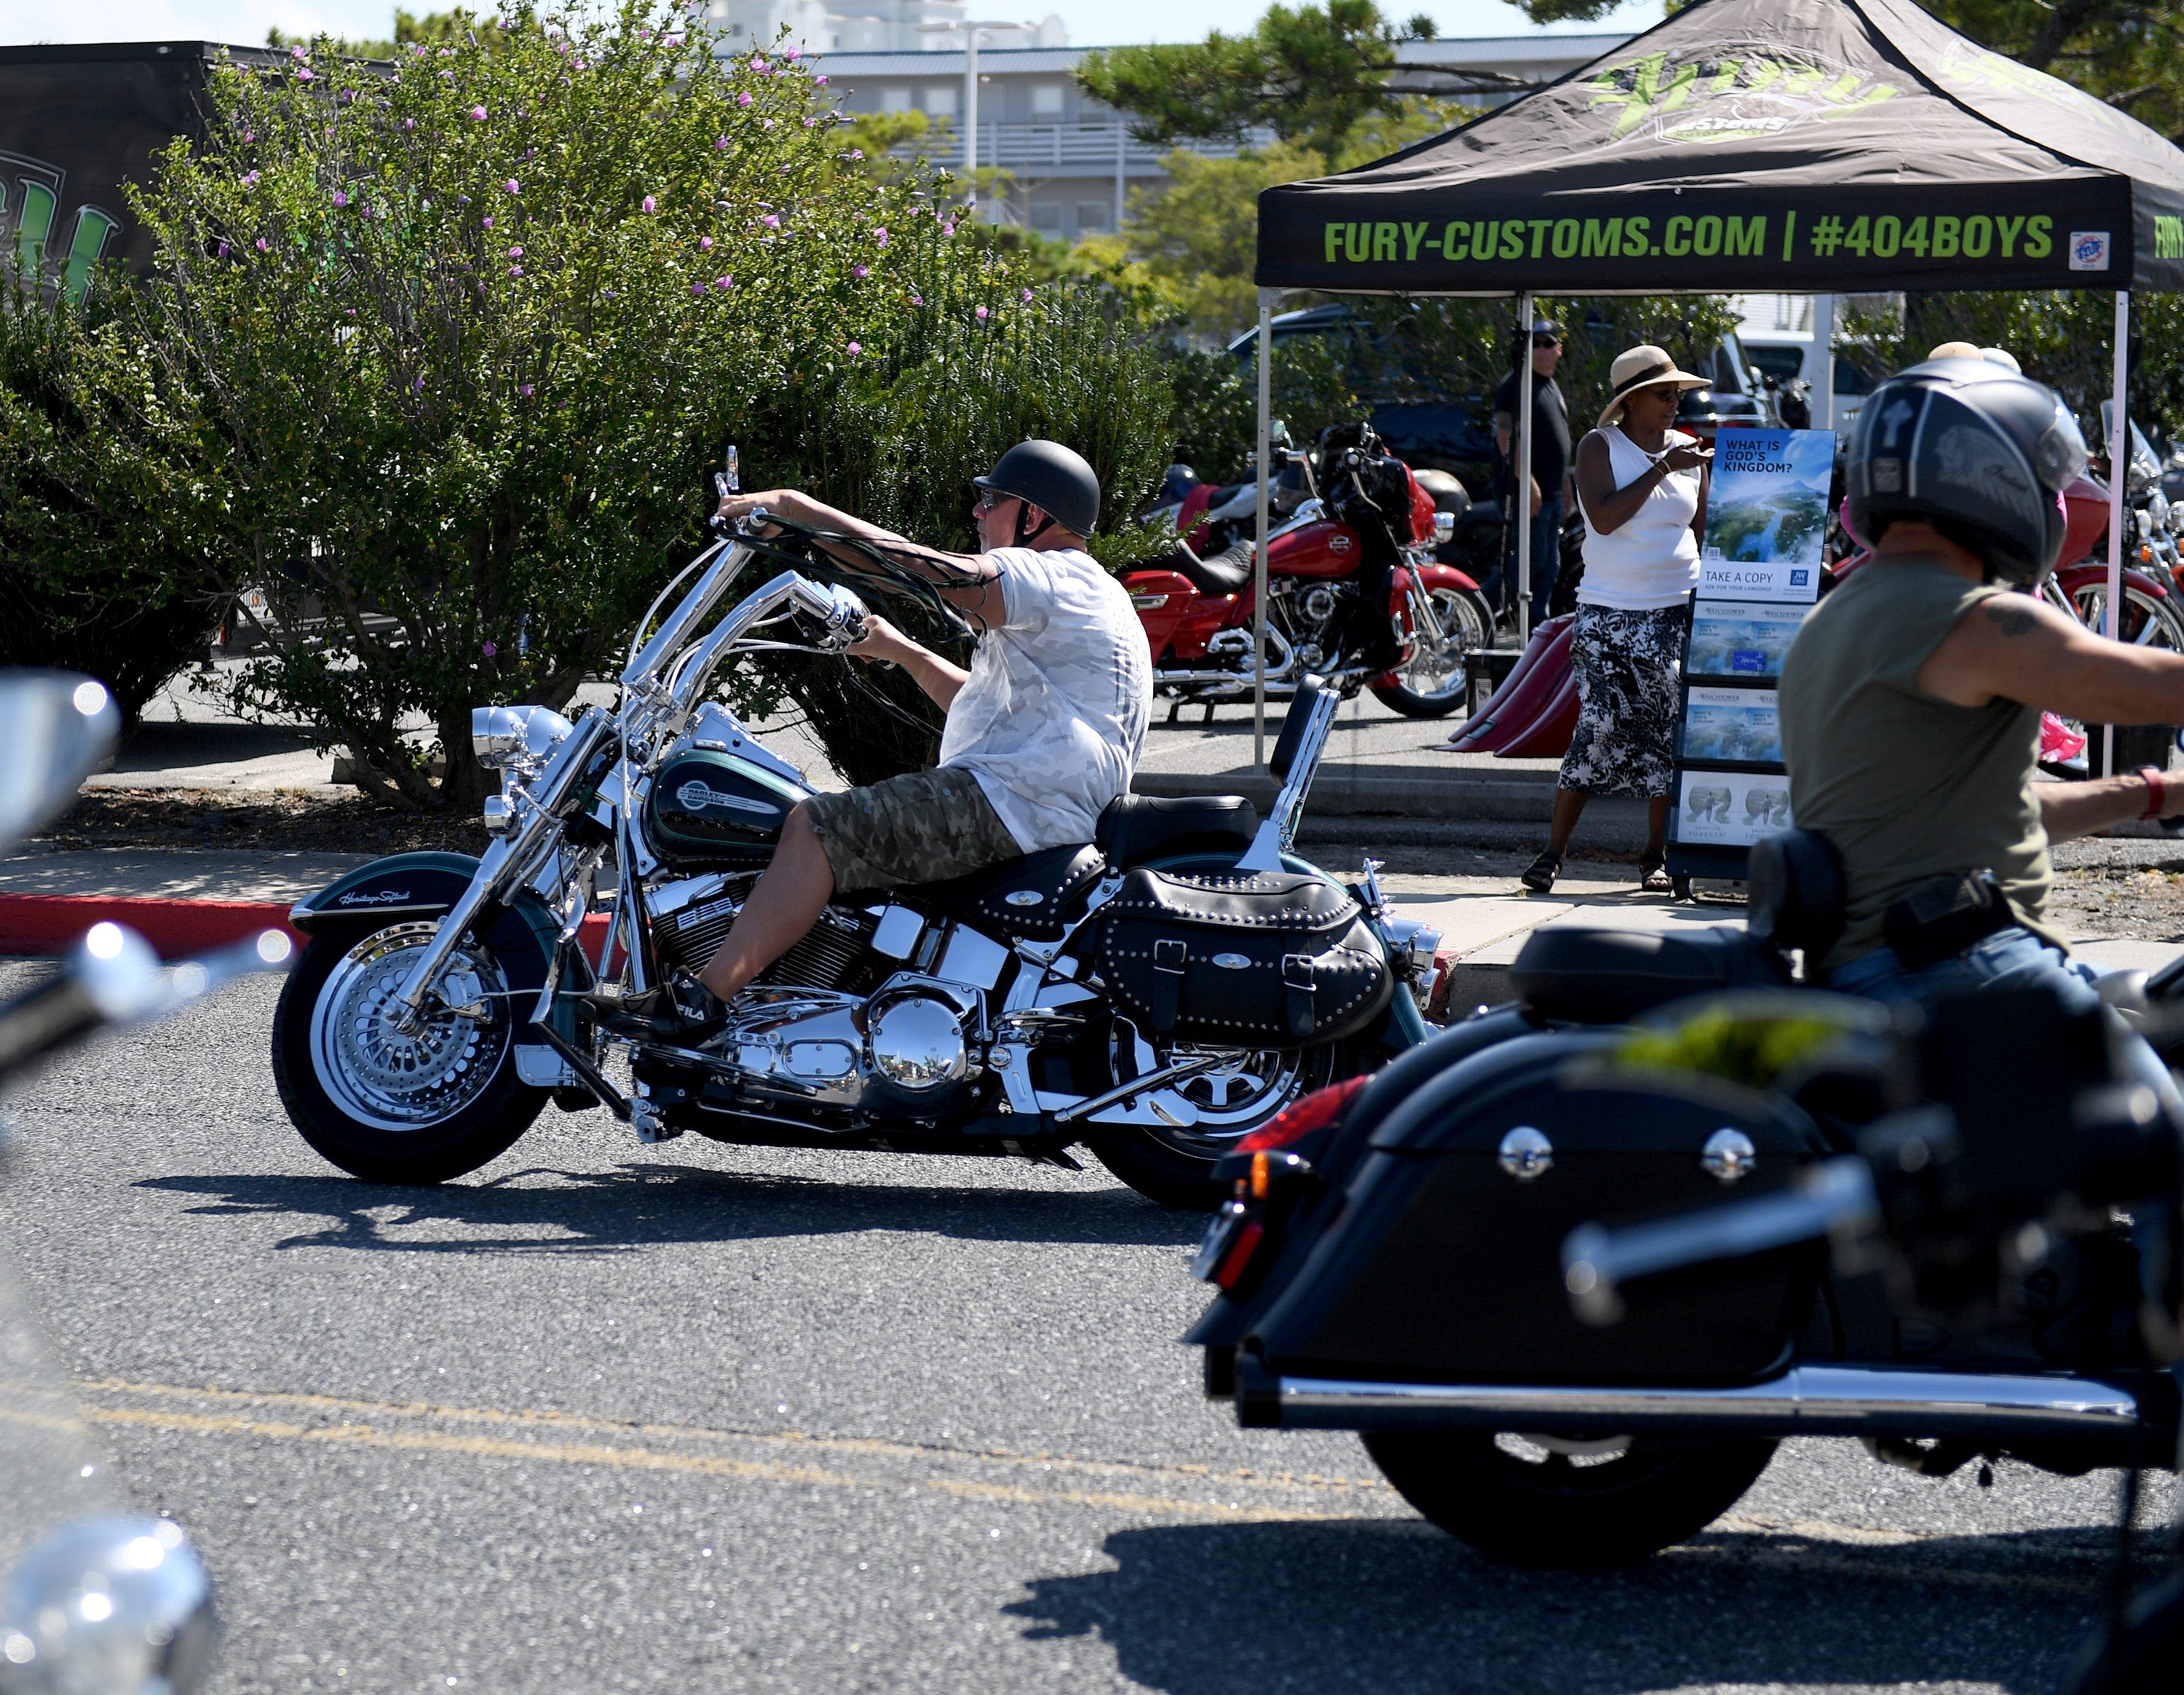 Ocean City's BikeFest announces big classic rock double bill for fourth day. All to know.